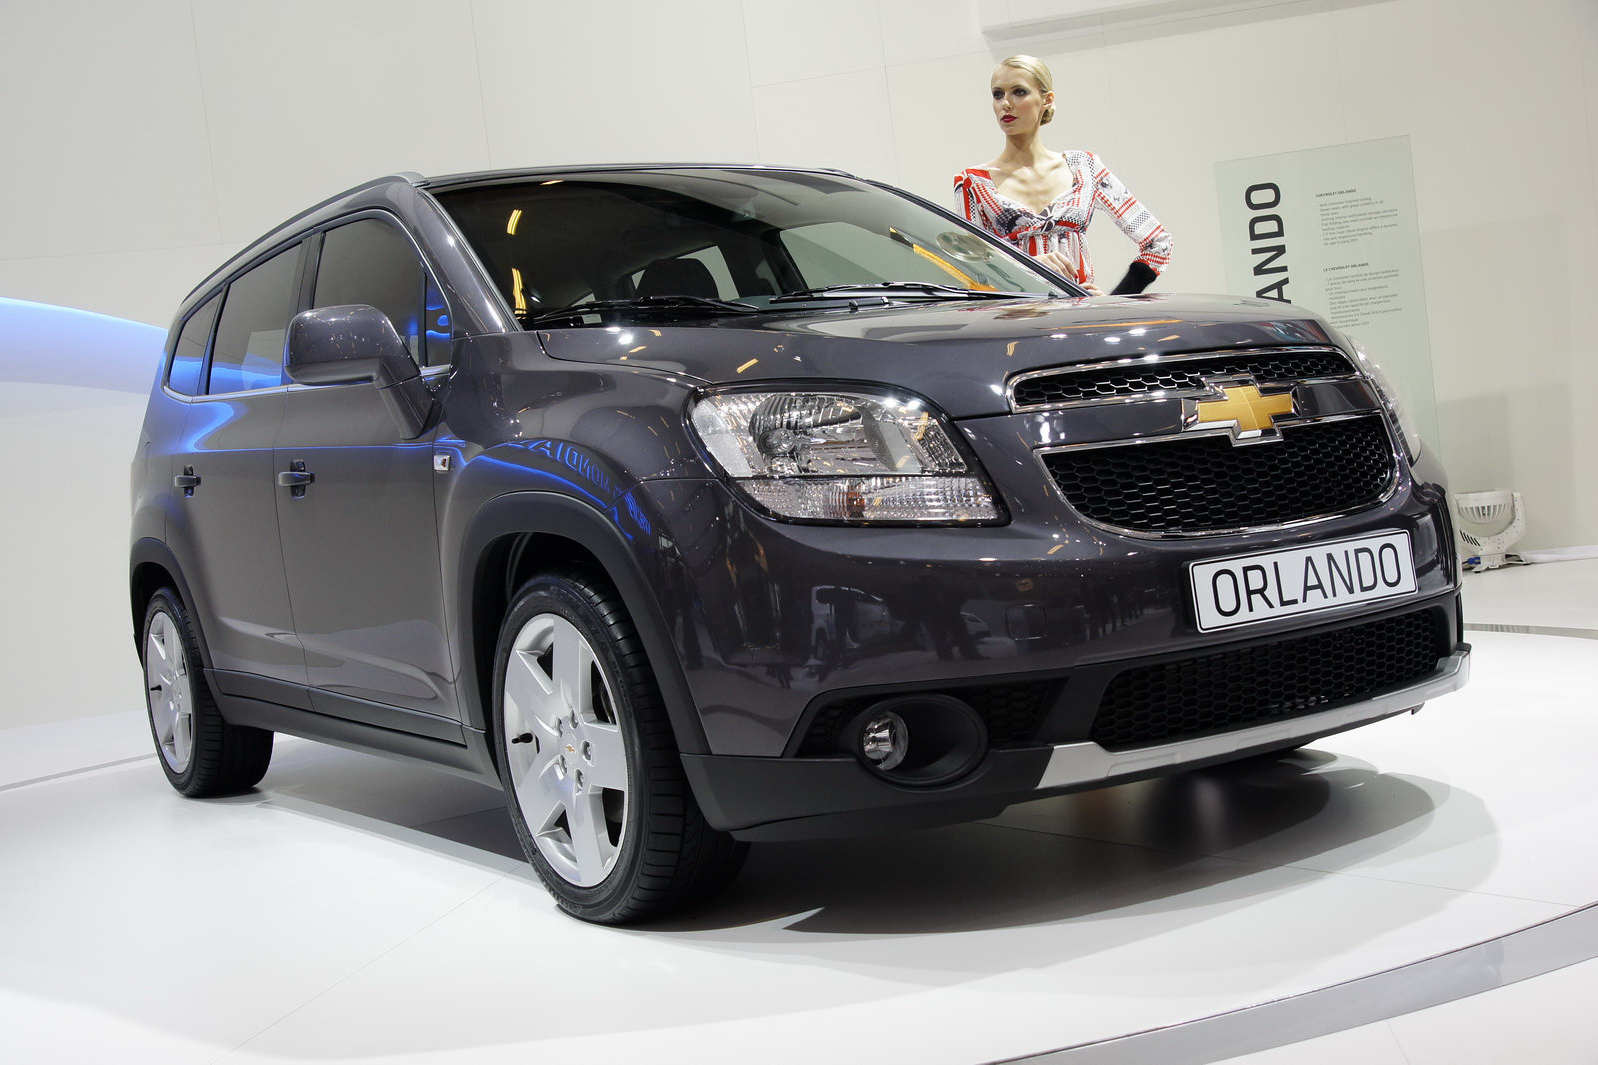 New Chevrolet Orlando MPV Shows up in Paris (With Live Pictures)